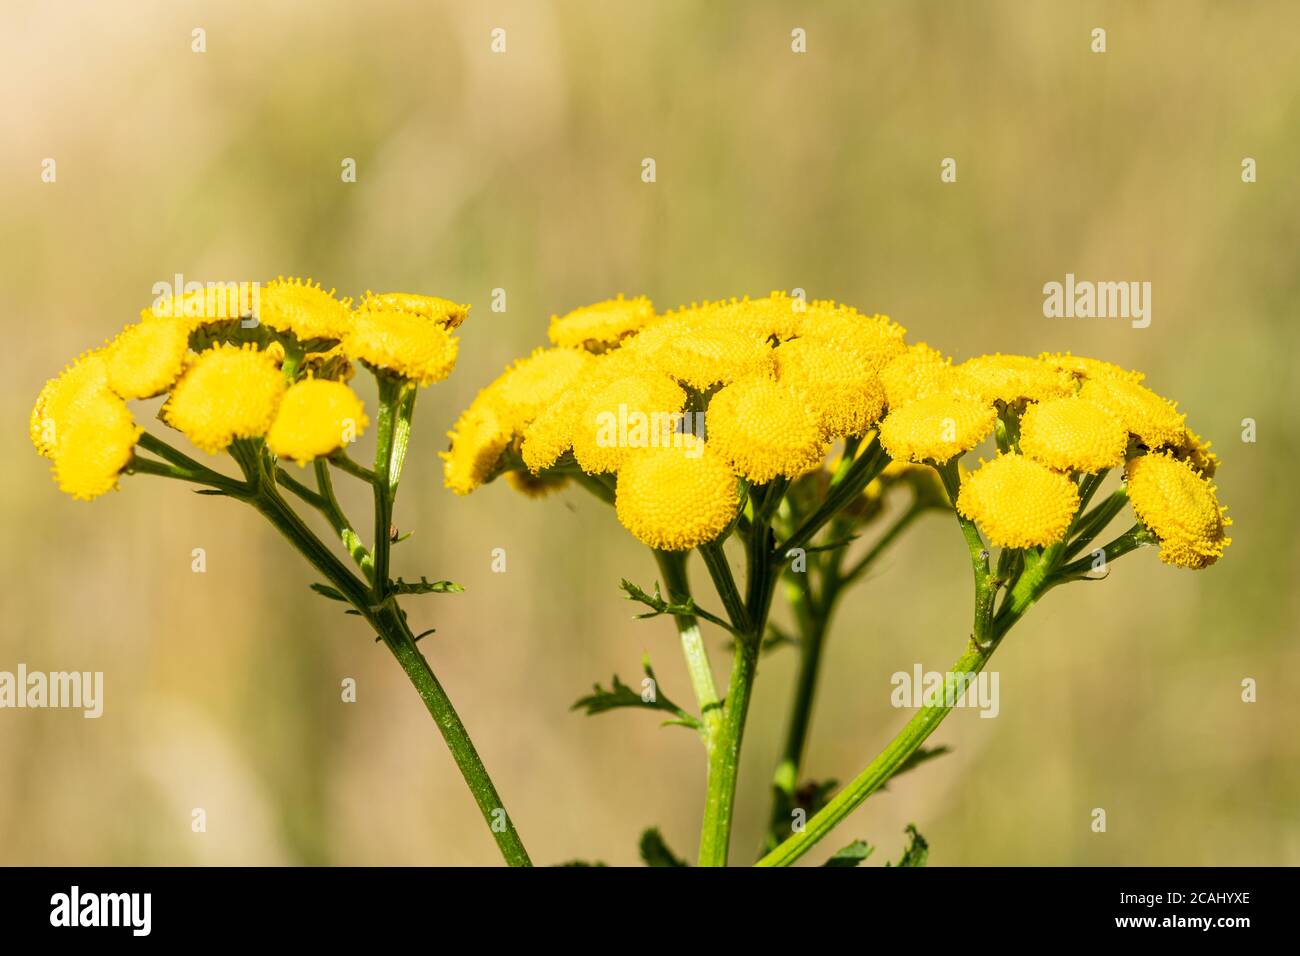 Tansy plant (Tanacetum vulgare) with yellow flowers, a perennial, herbaceous flowering plant of the aster family Stock Photo